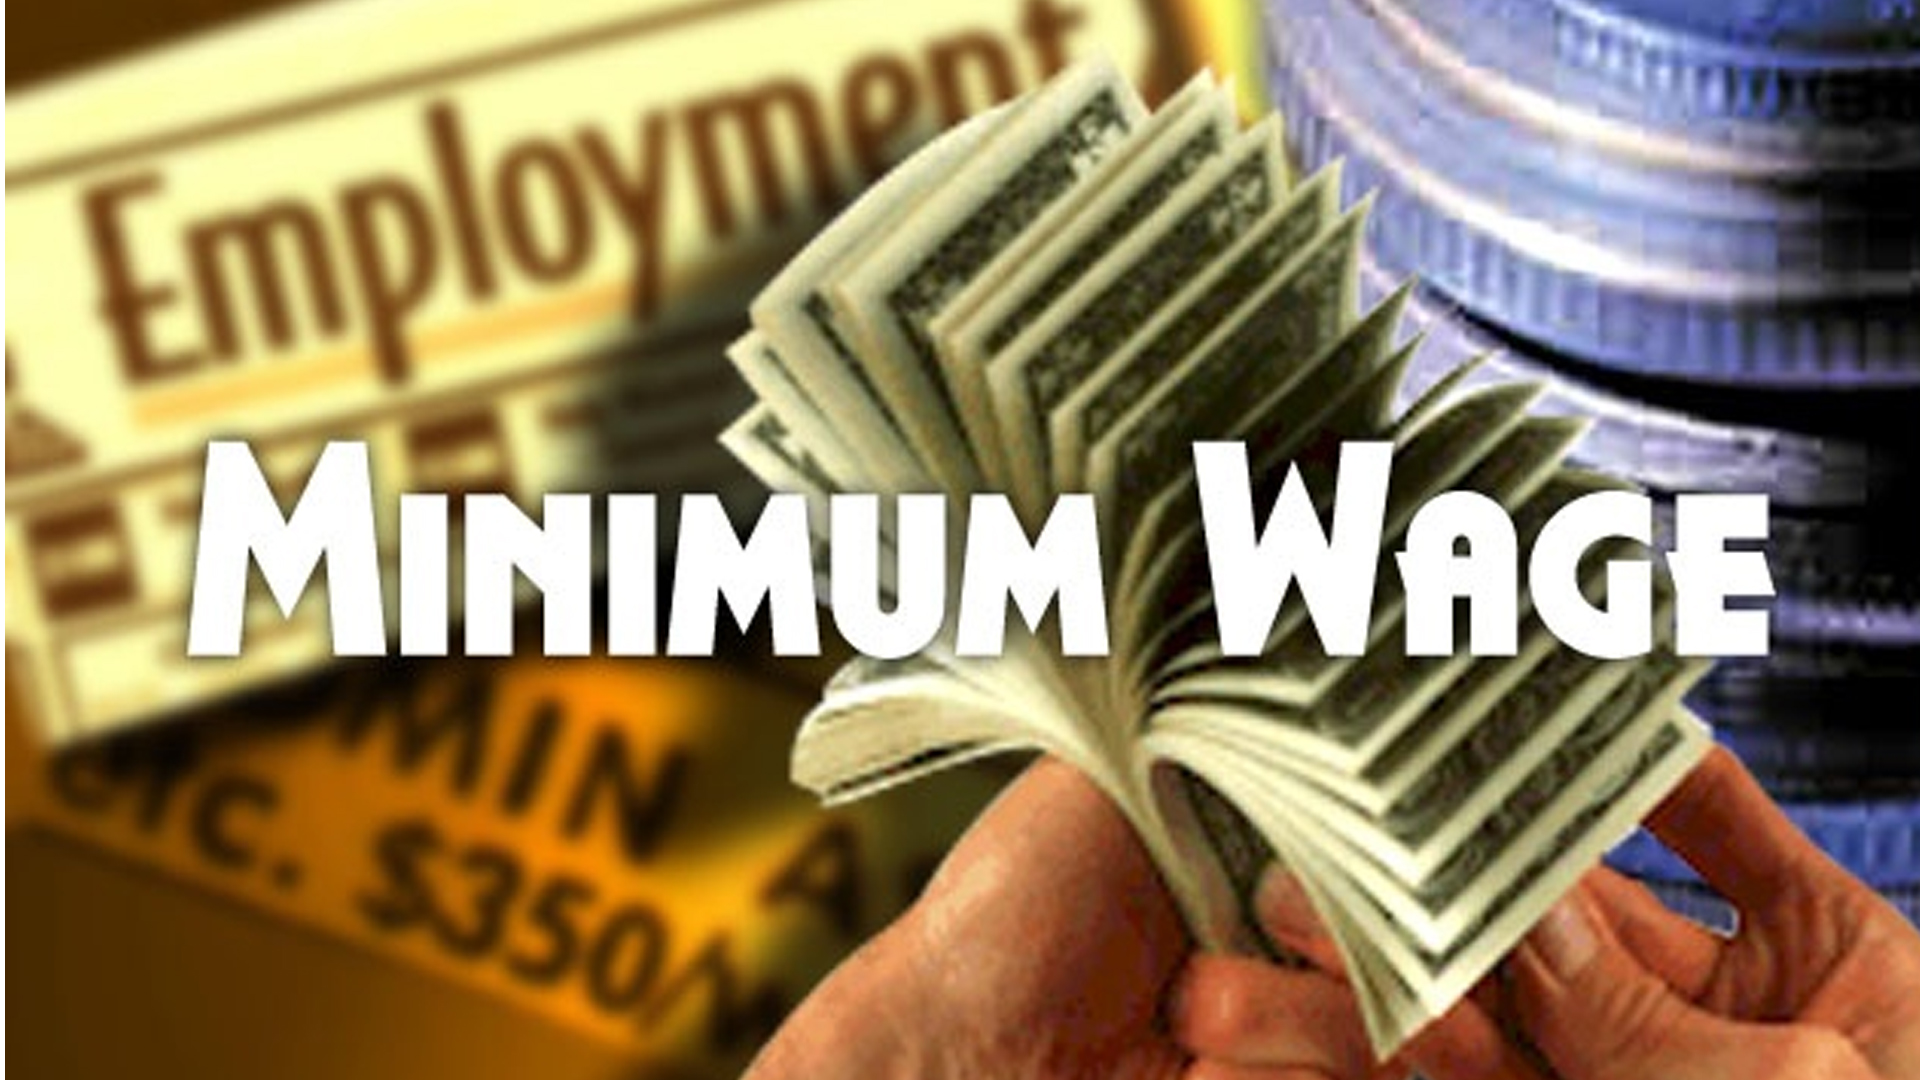 Minimum wages if not paid can become a dynamite - An Explosive Issue !!!!